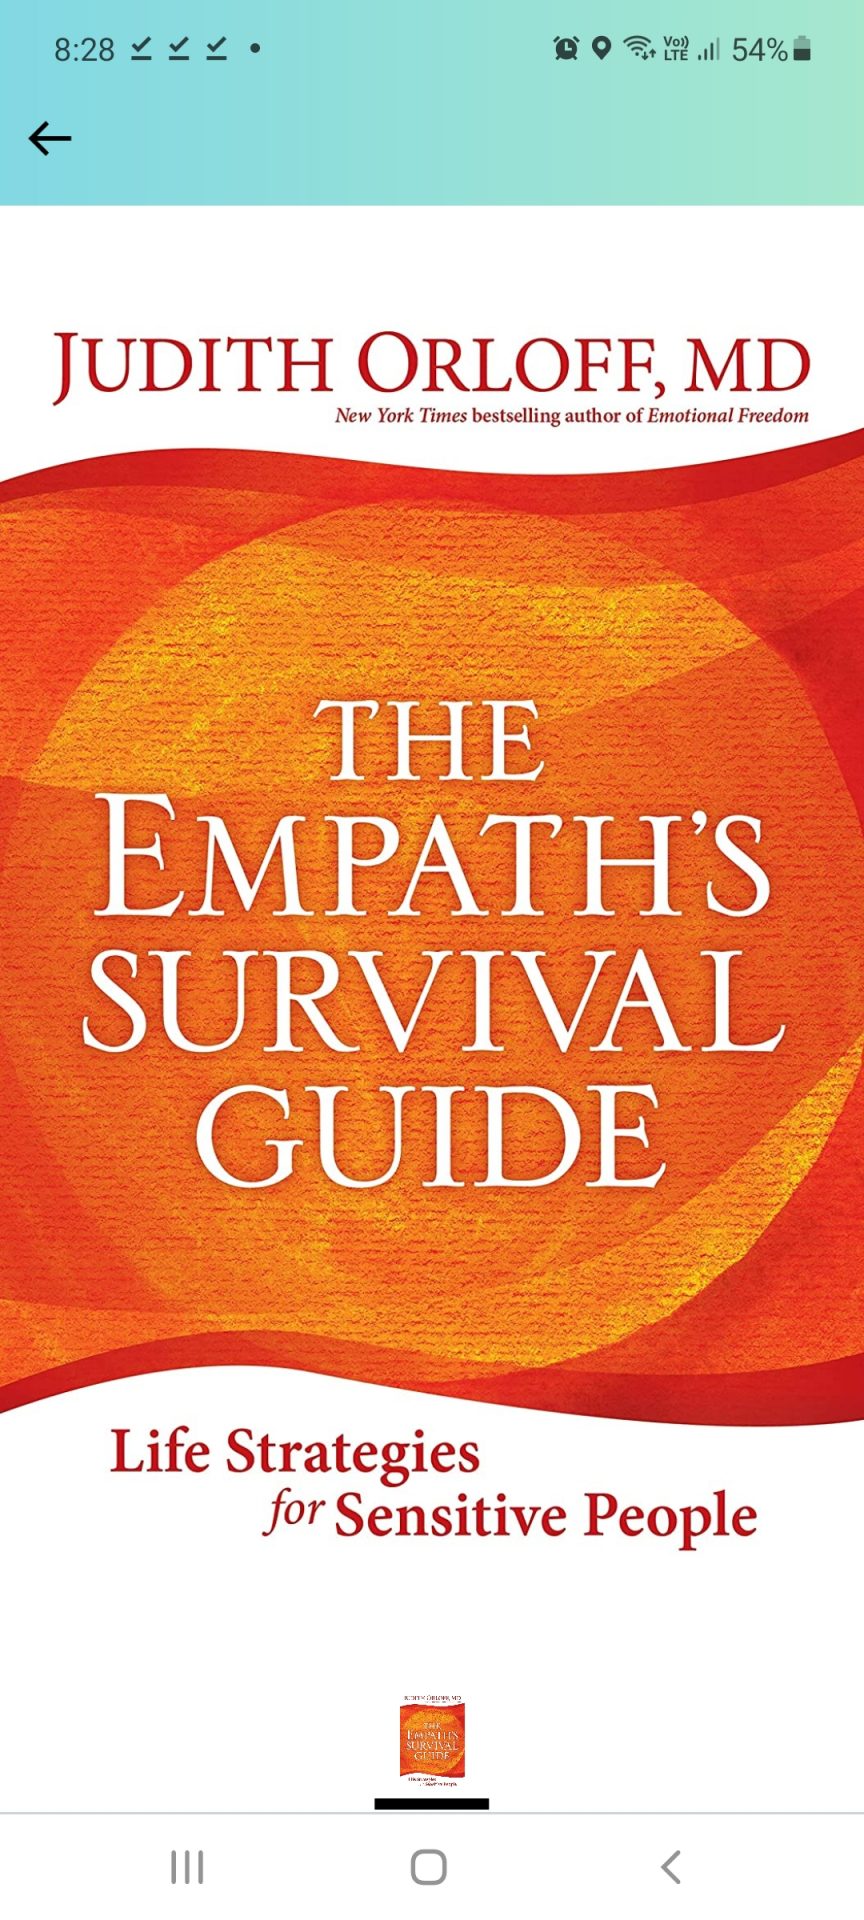 Book - The Empaths Survival Guide by Dr Judith Orliff *already purchased no longer available*